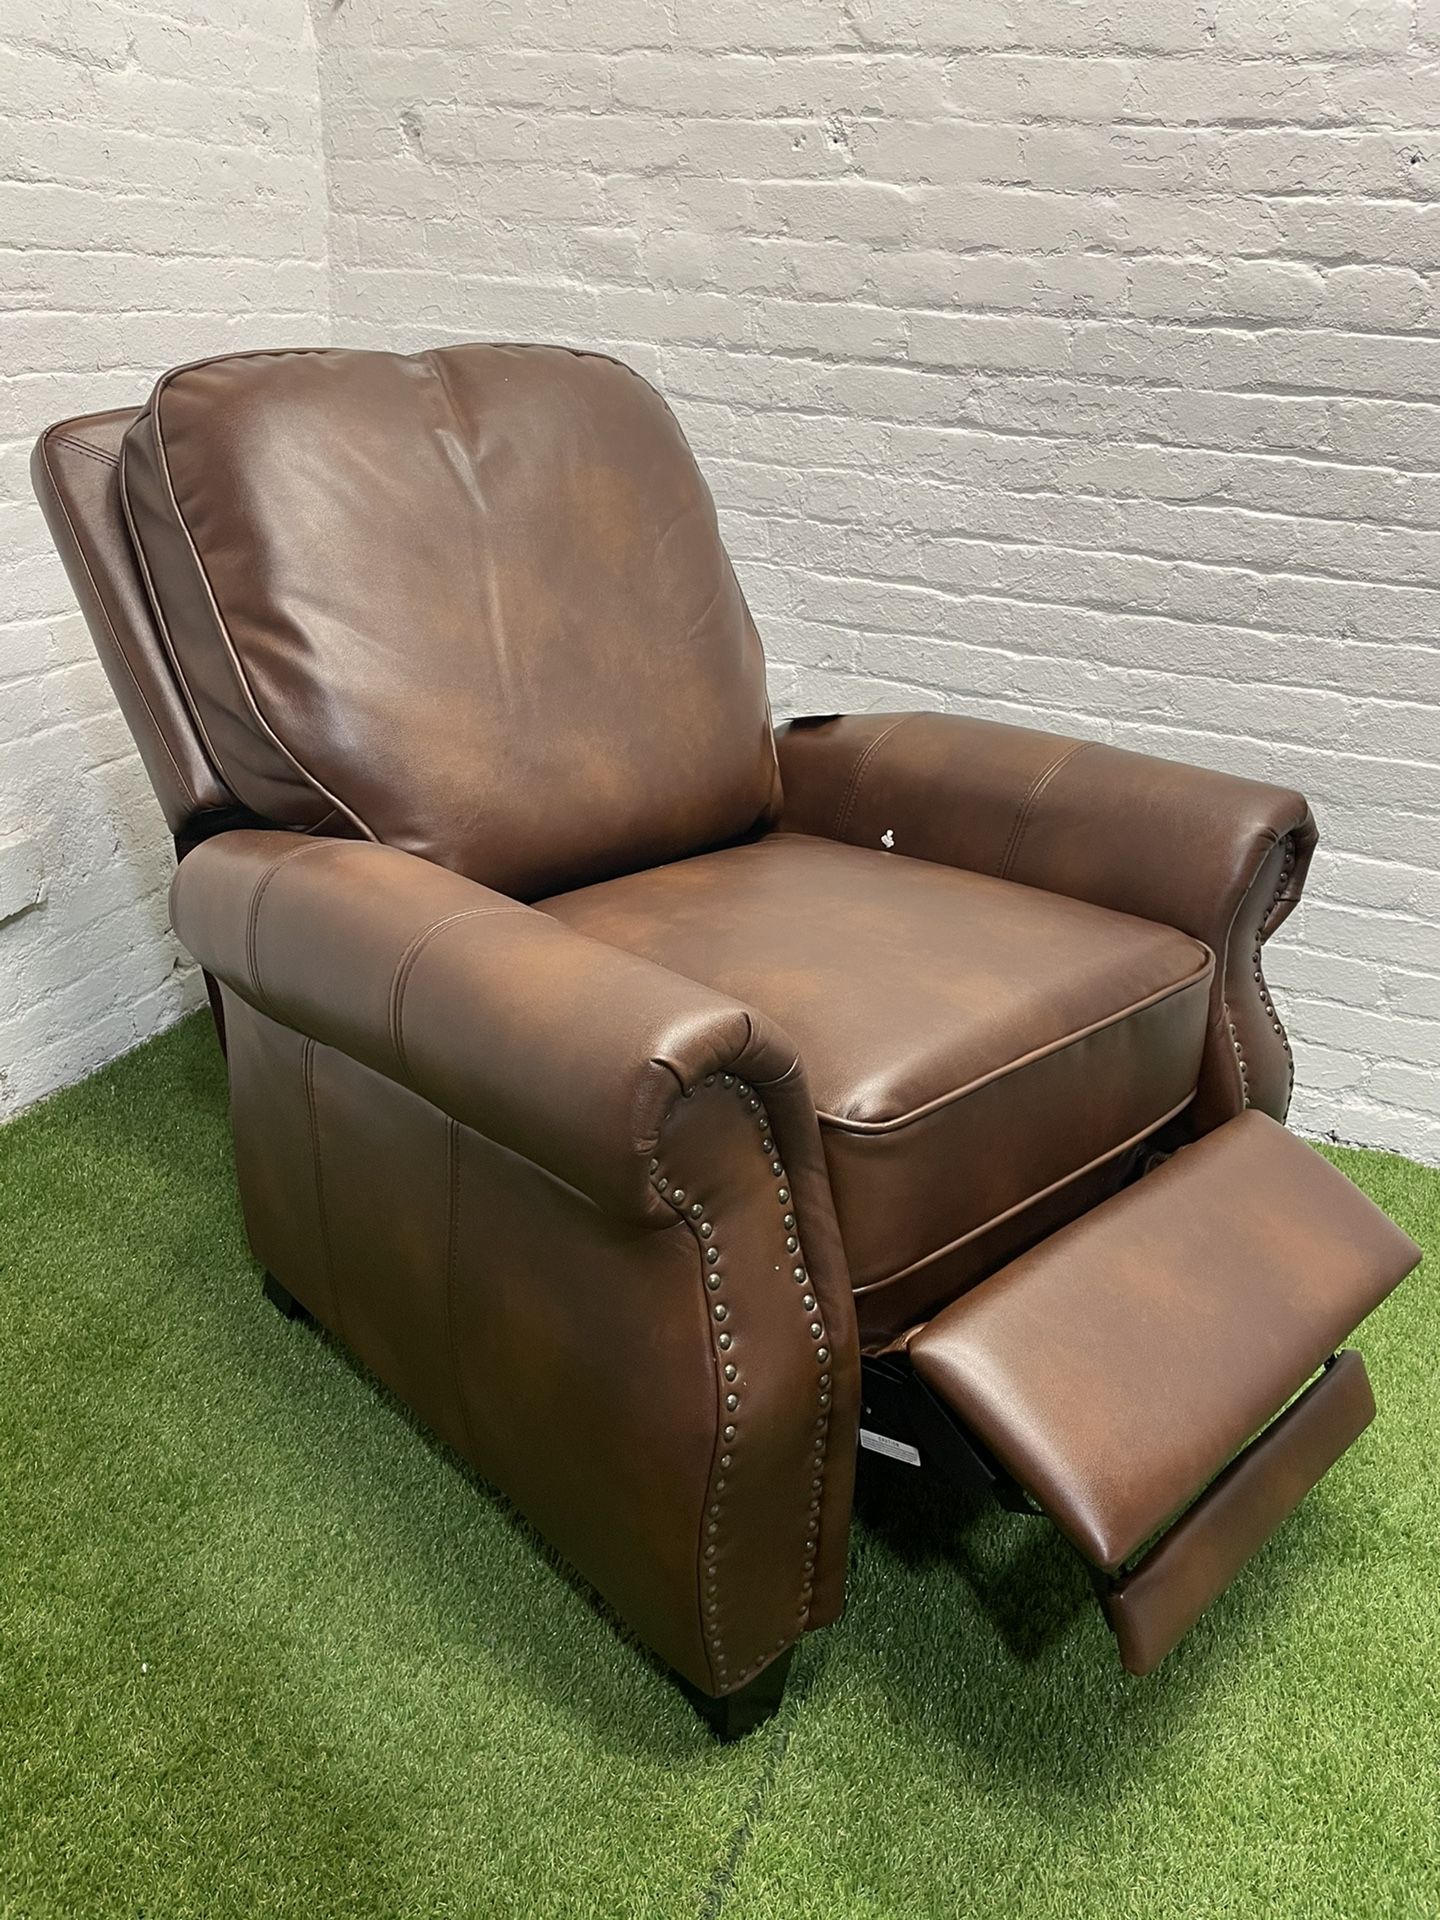 Torreon PU Leather Recliner Club Chair by Christopher Knight Home - Light brown